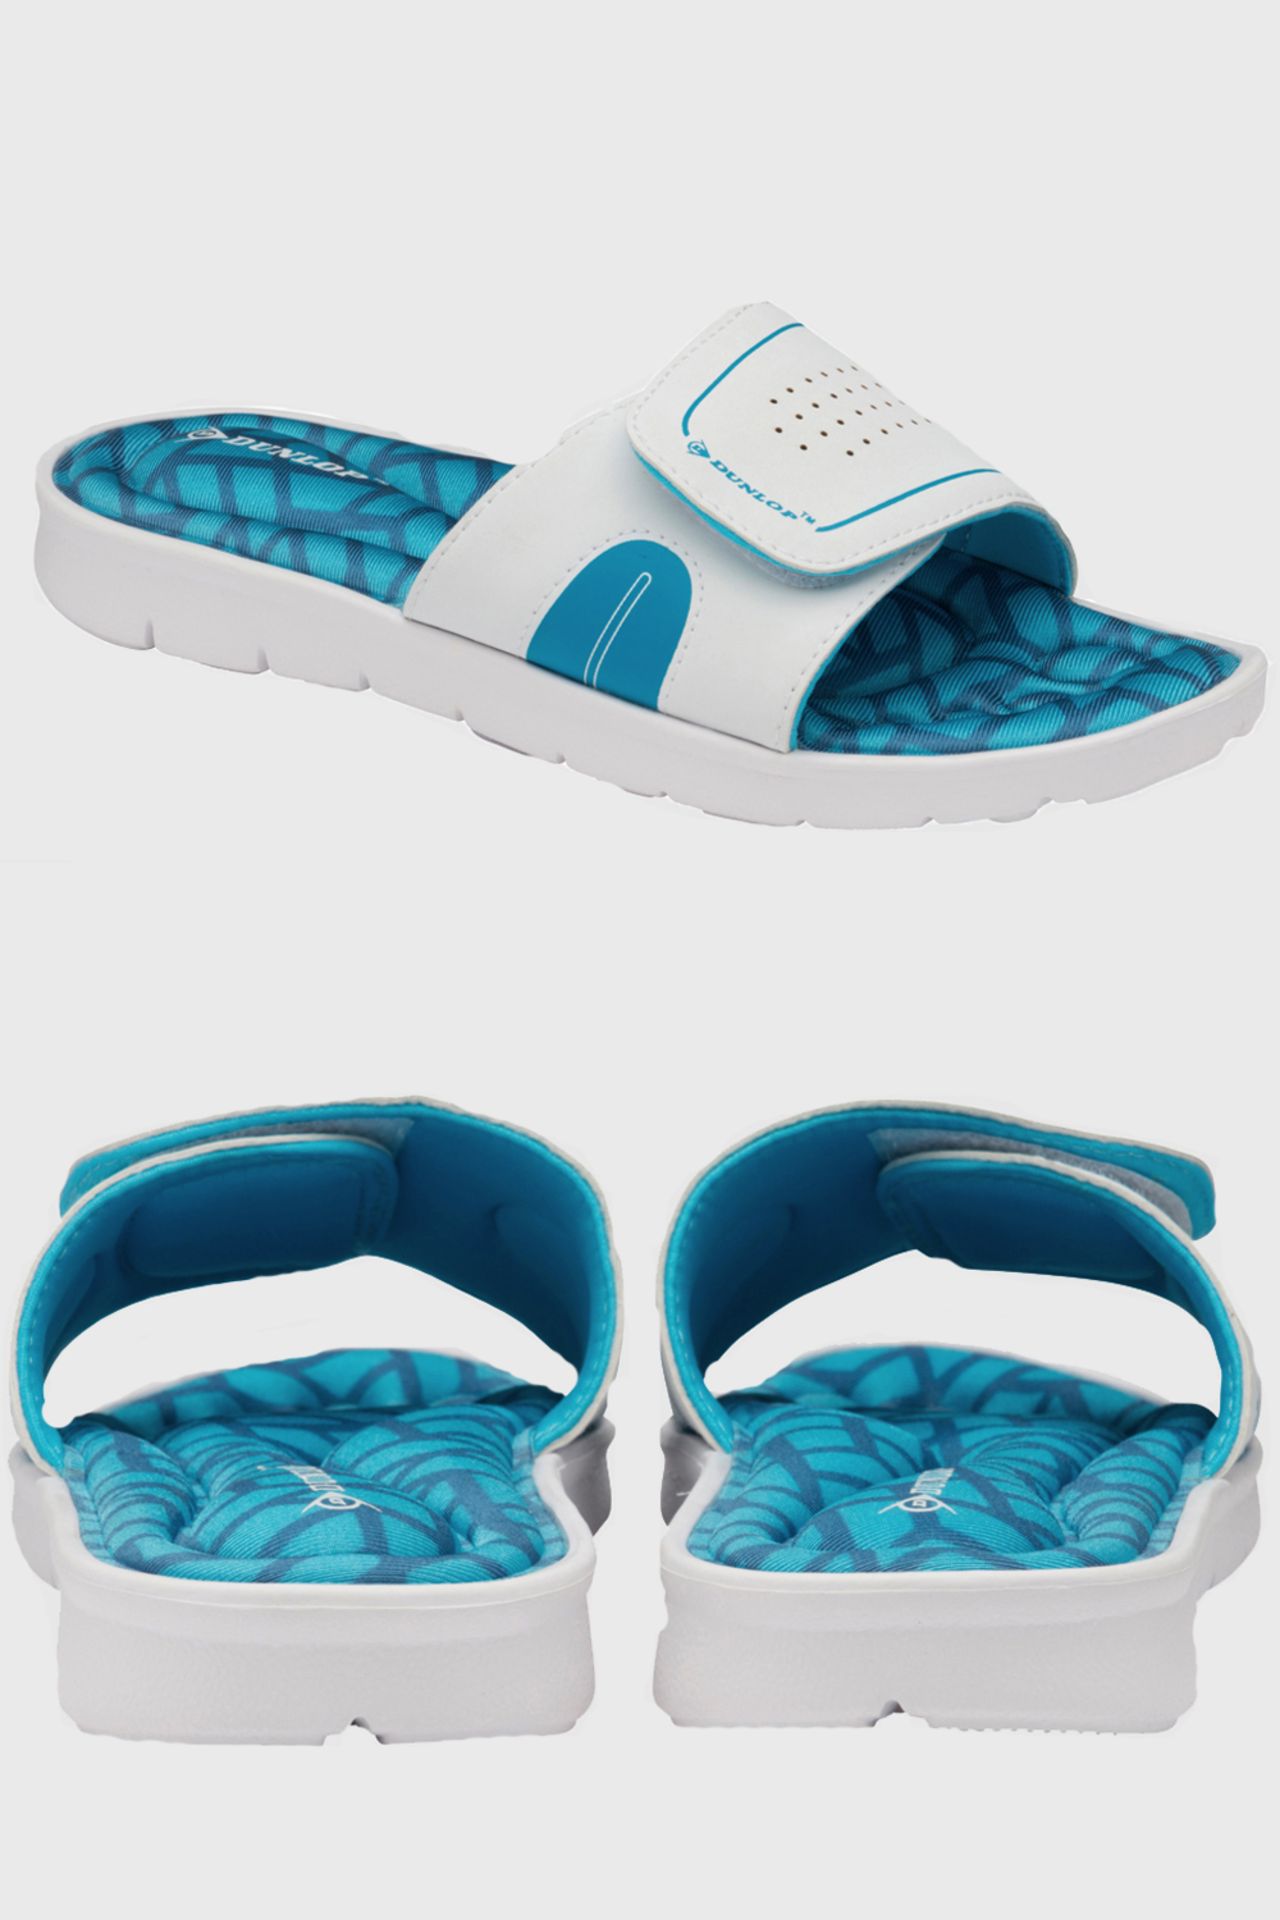 14 X BRAND NEW JAYNE DUNLOP ADJUSTABLE MEMORAY FOAM SLIDERS IN SIZES 4,5,6,7,8,9 COLOUR BLUE AND - Image 2 of 3